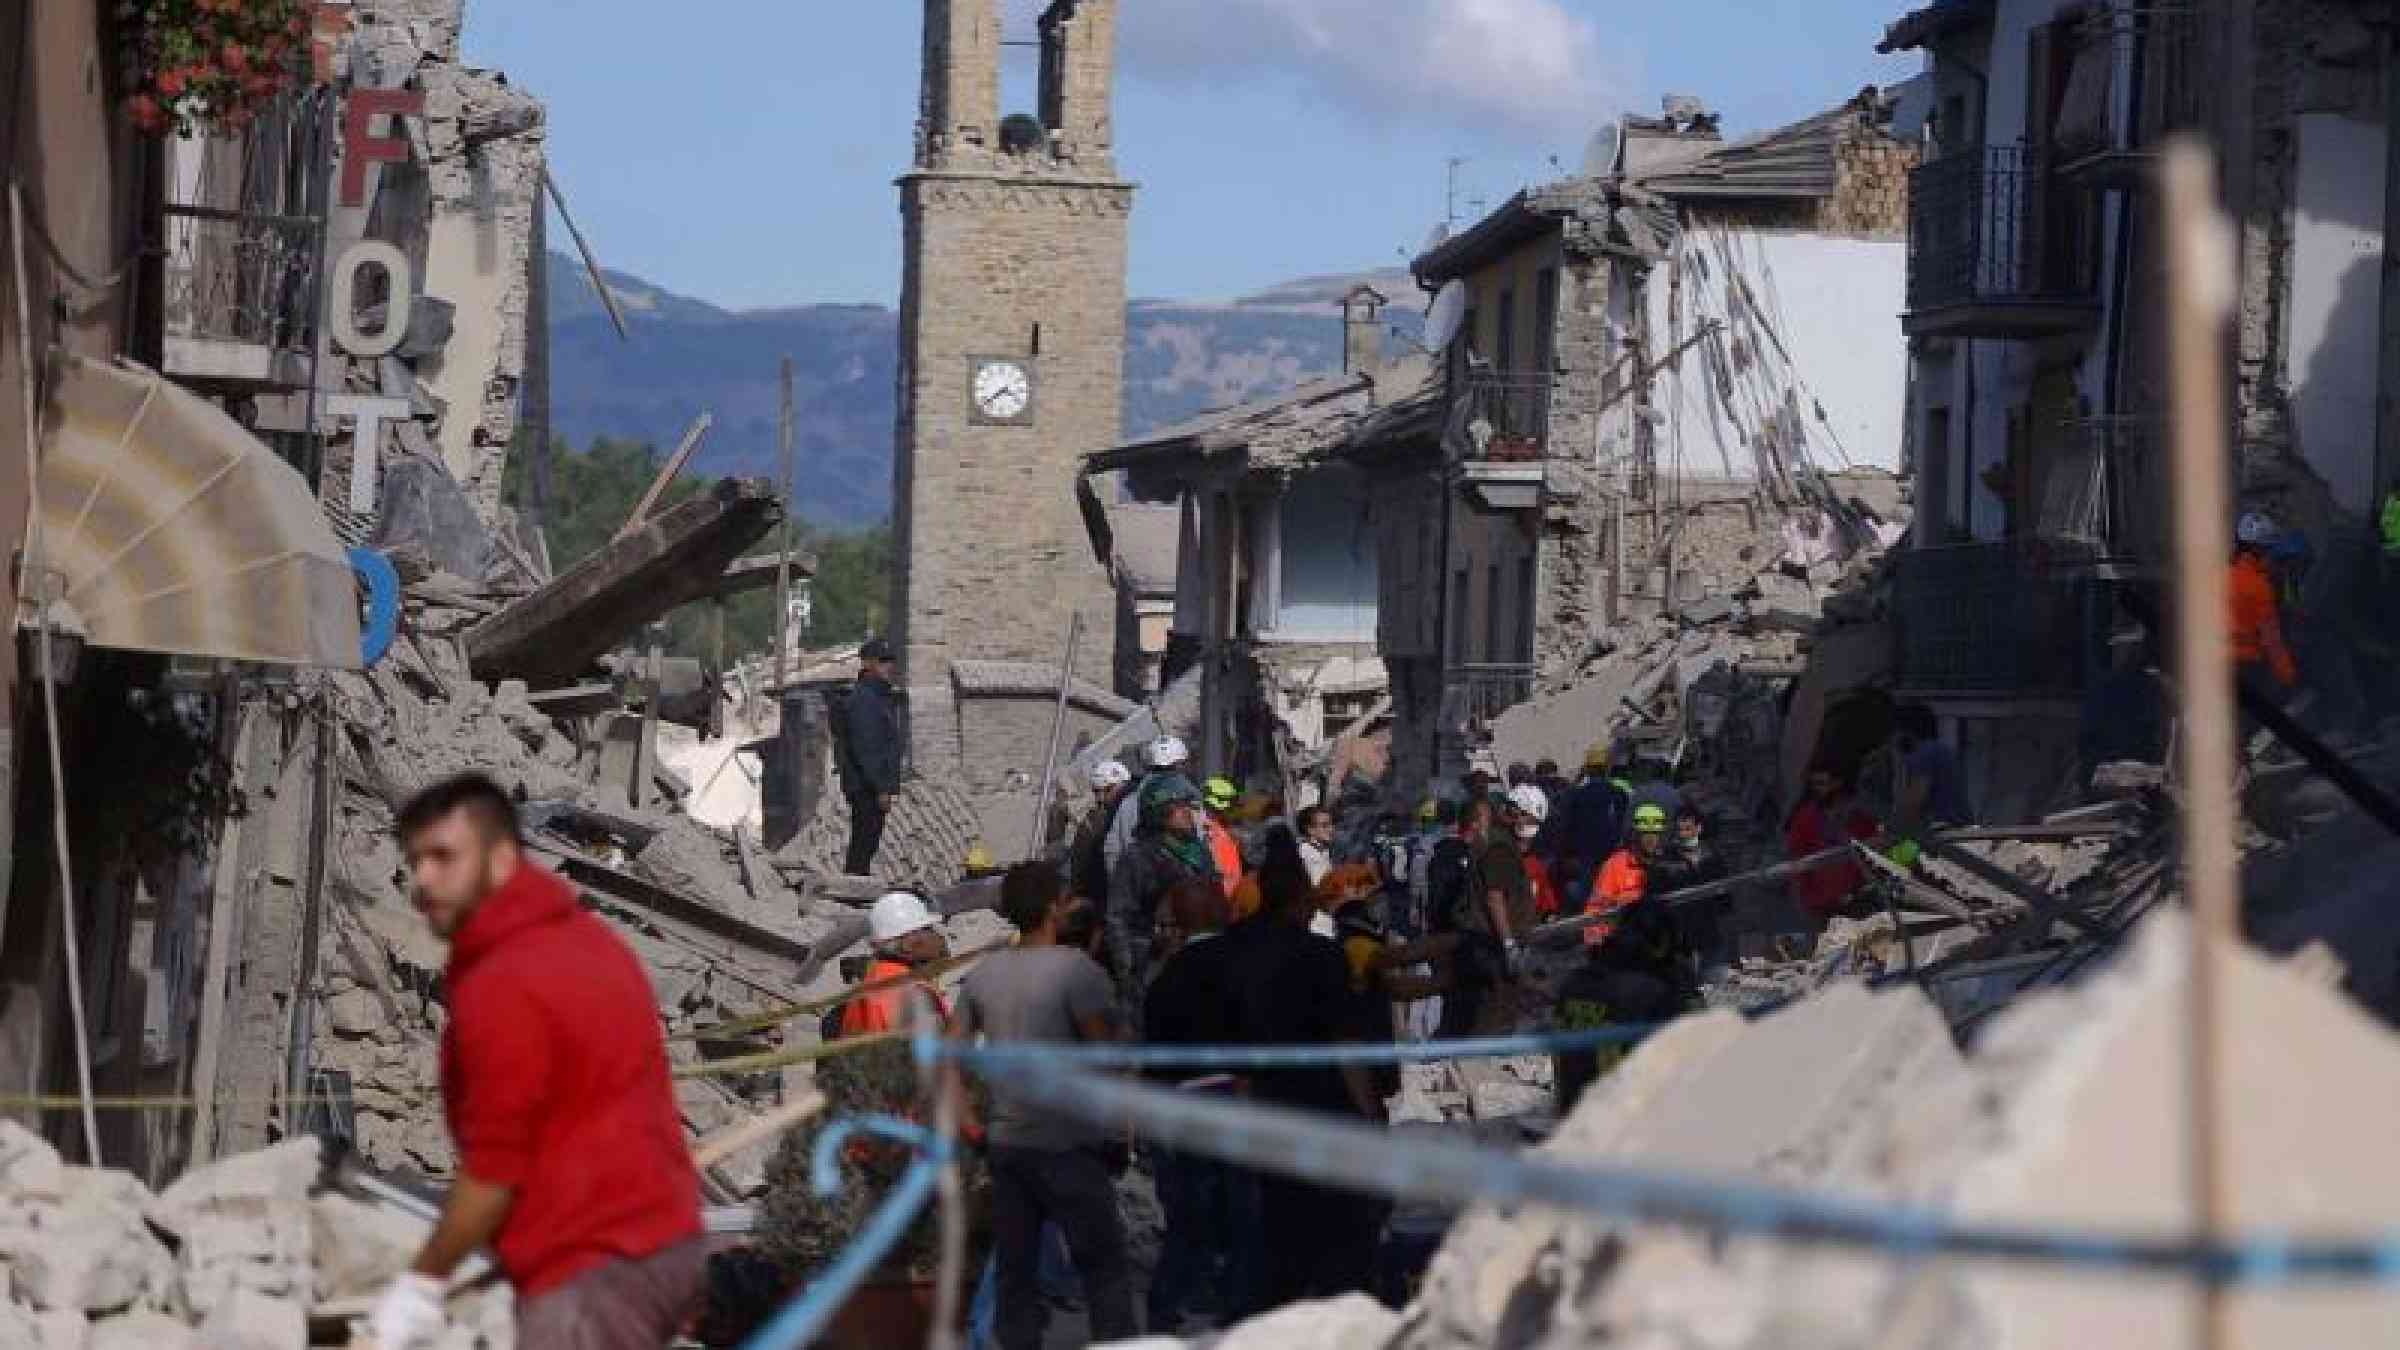 Rescue workers at the scene of  last Wednesday's earthquake